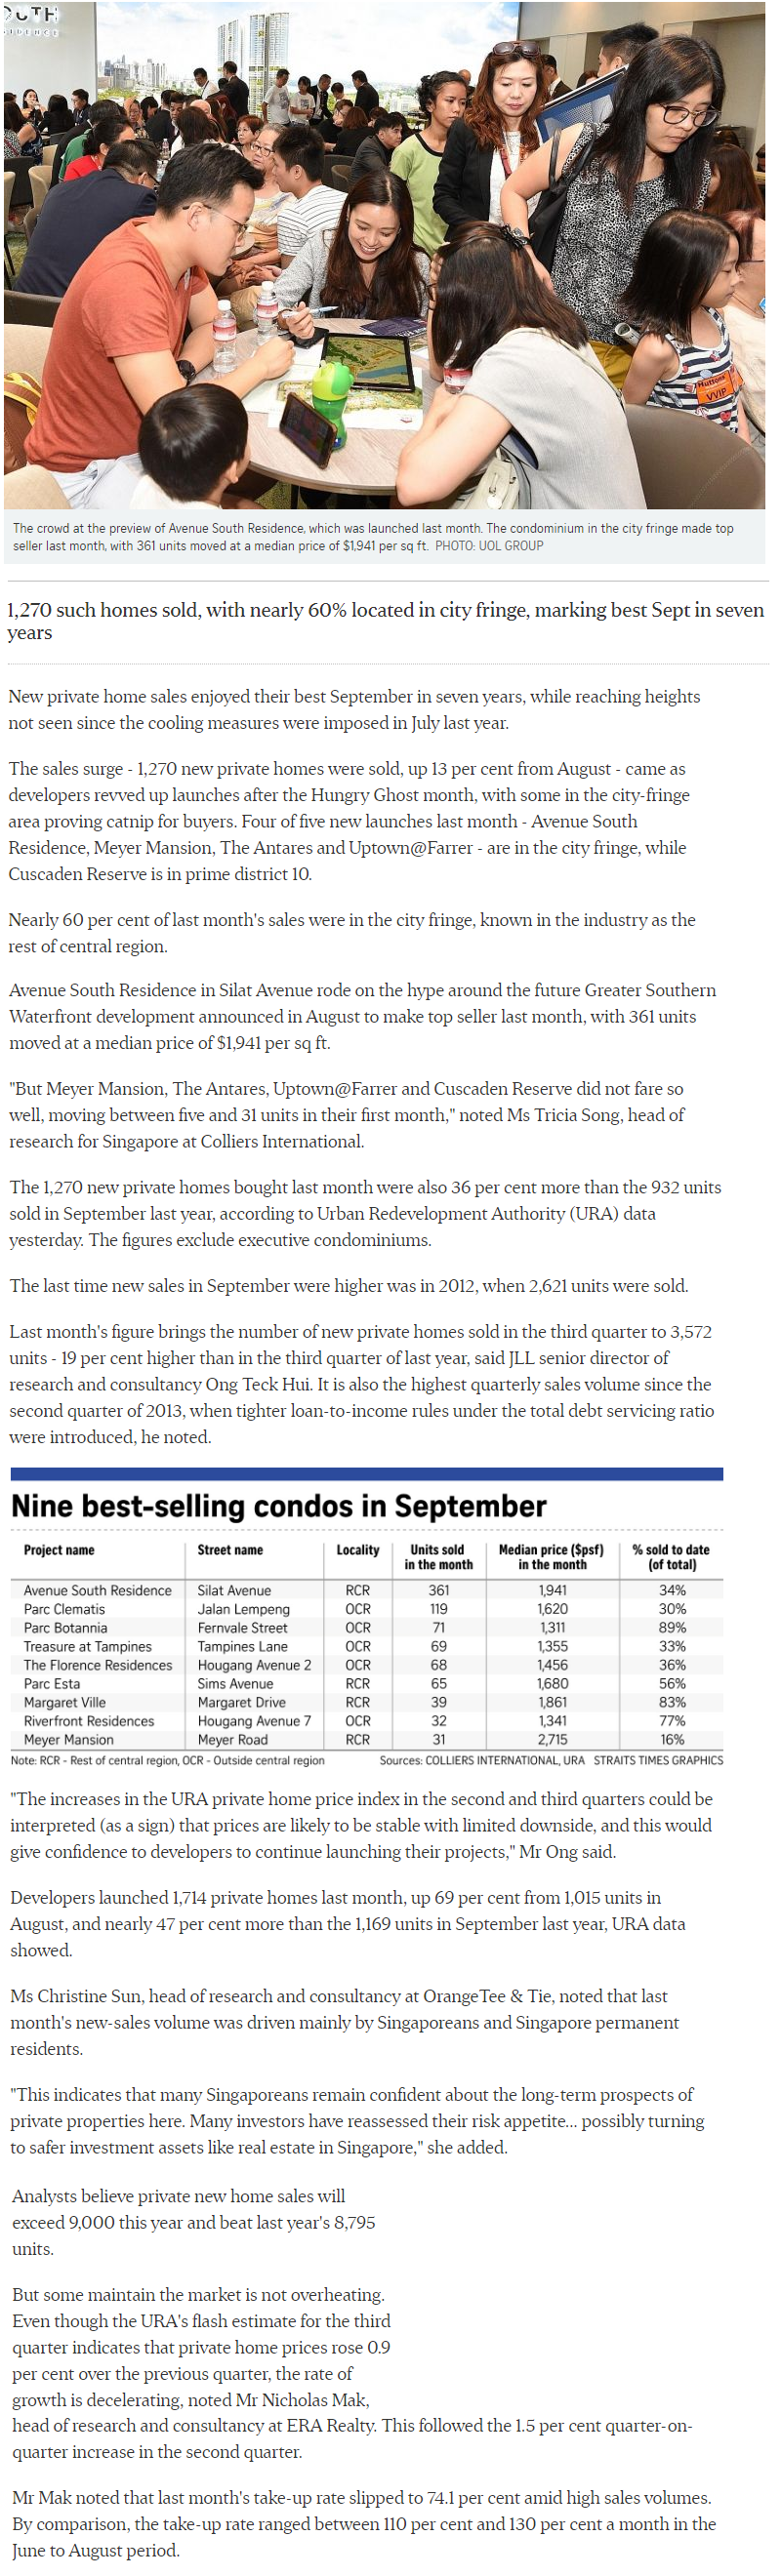 15 Holland Hill - New private Home Sales Hit A Hight In September